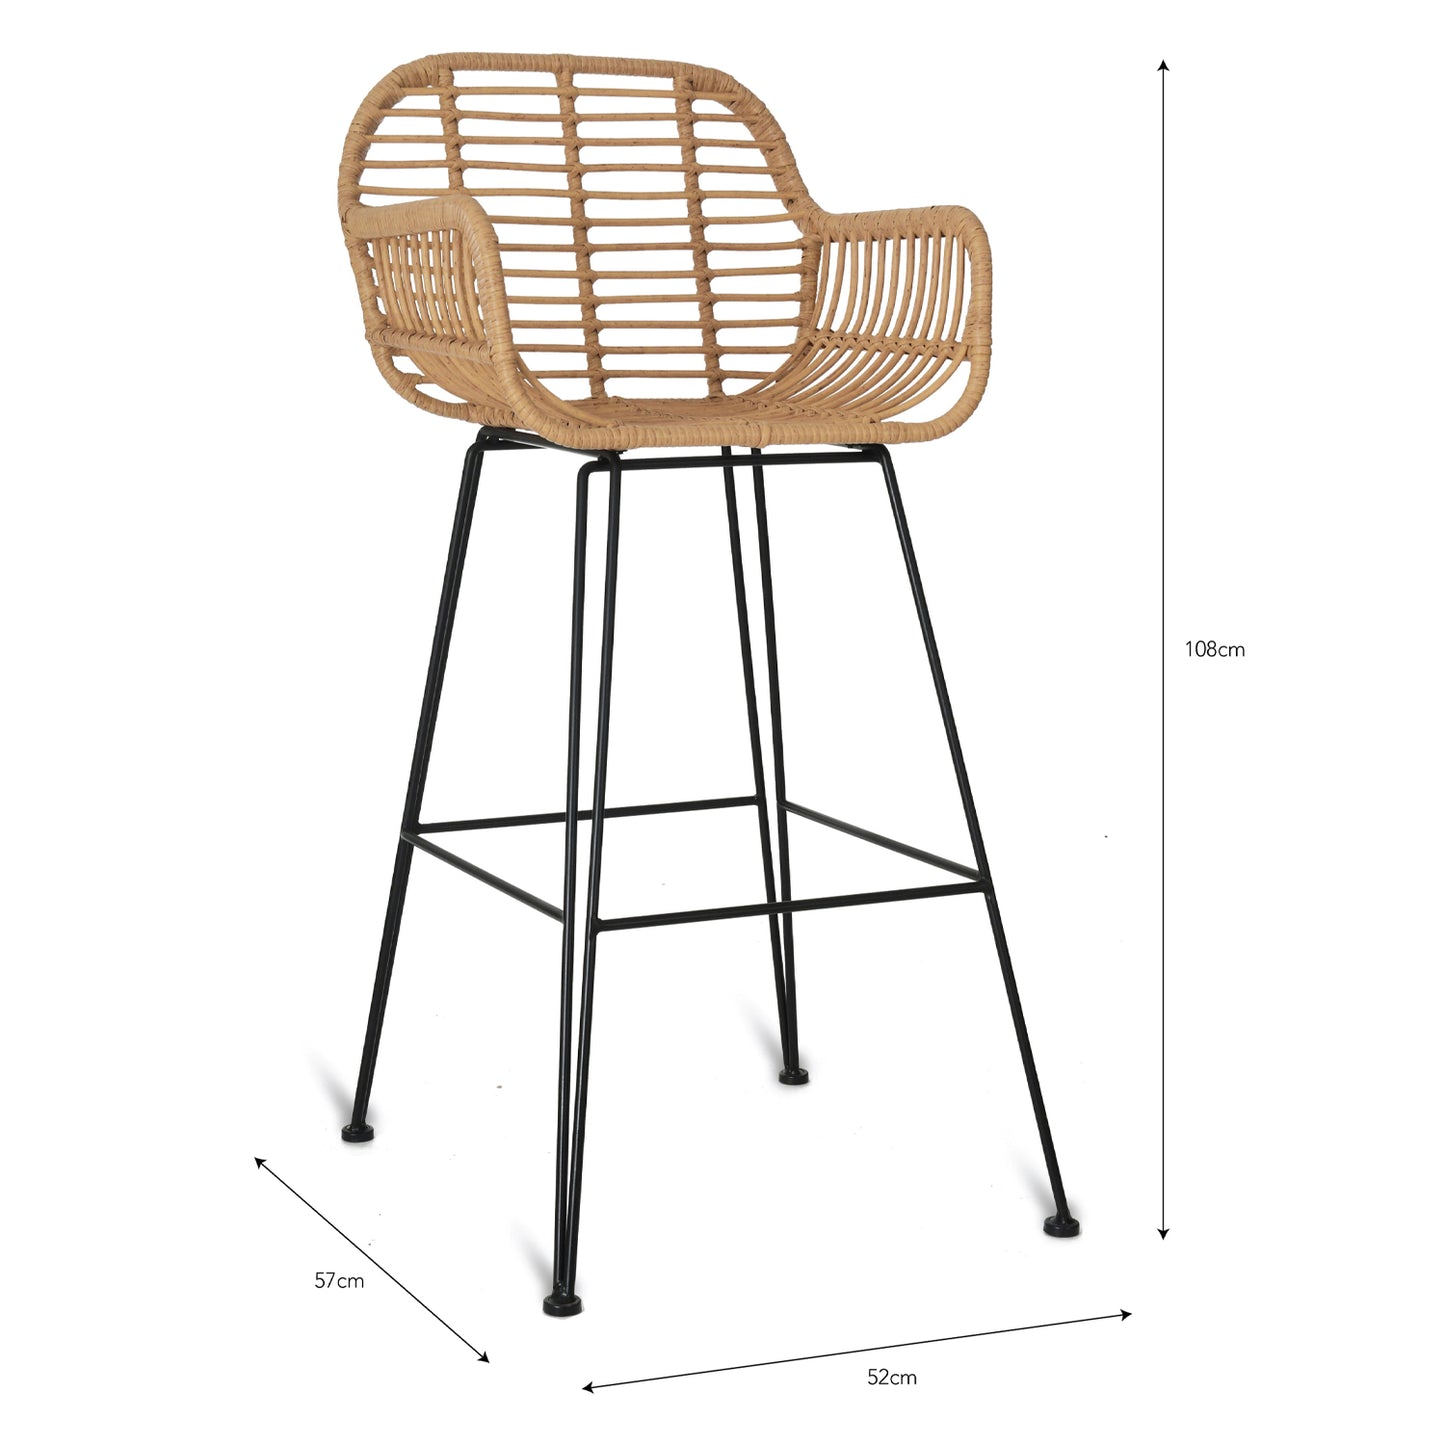 Hampstead Outdoor Bar Stool with Arms PE Bamboo by Garden Trading